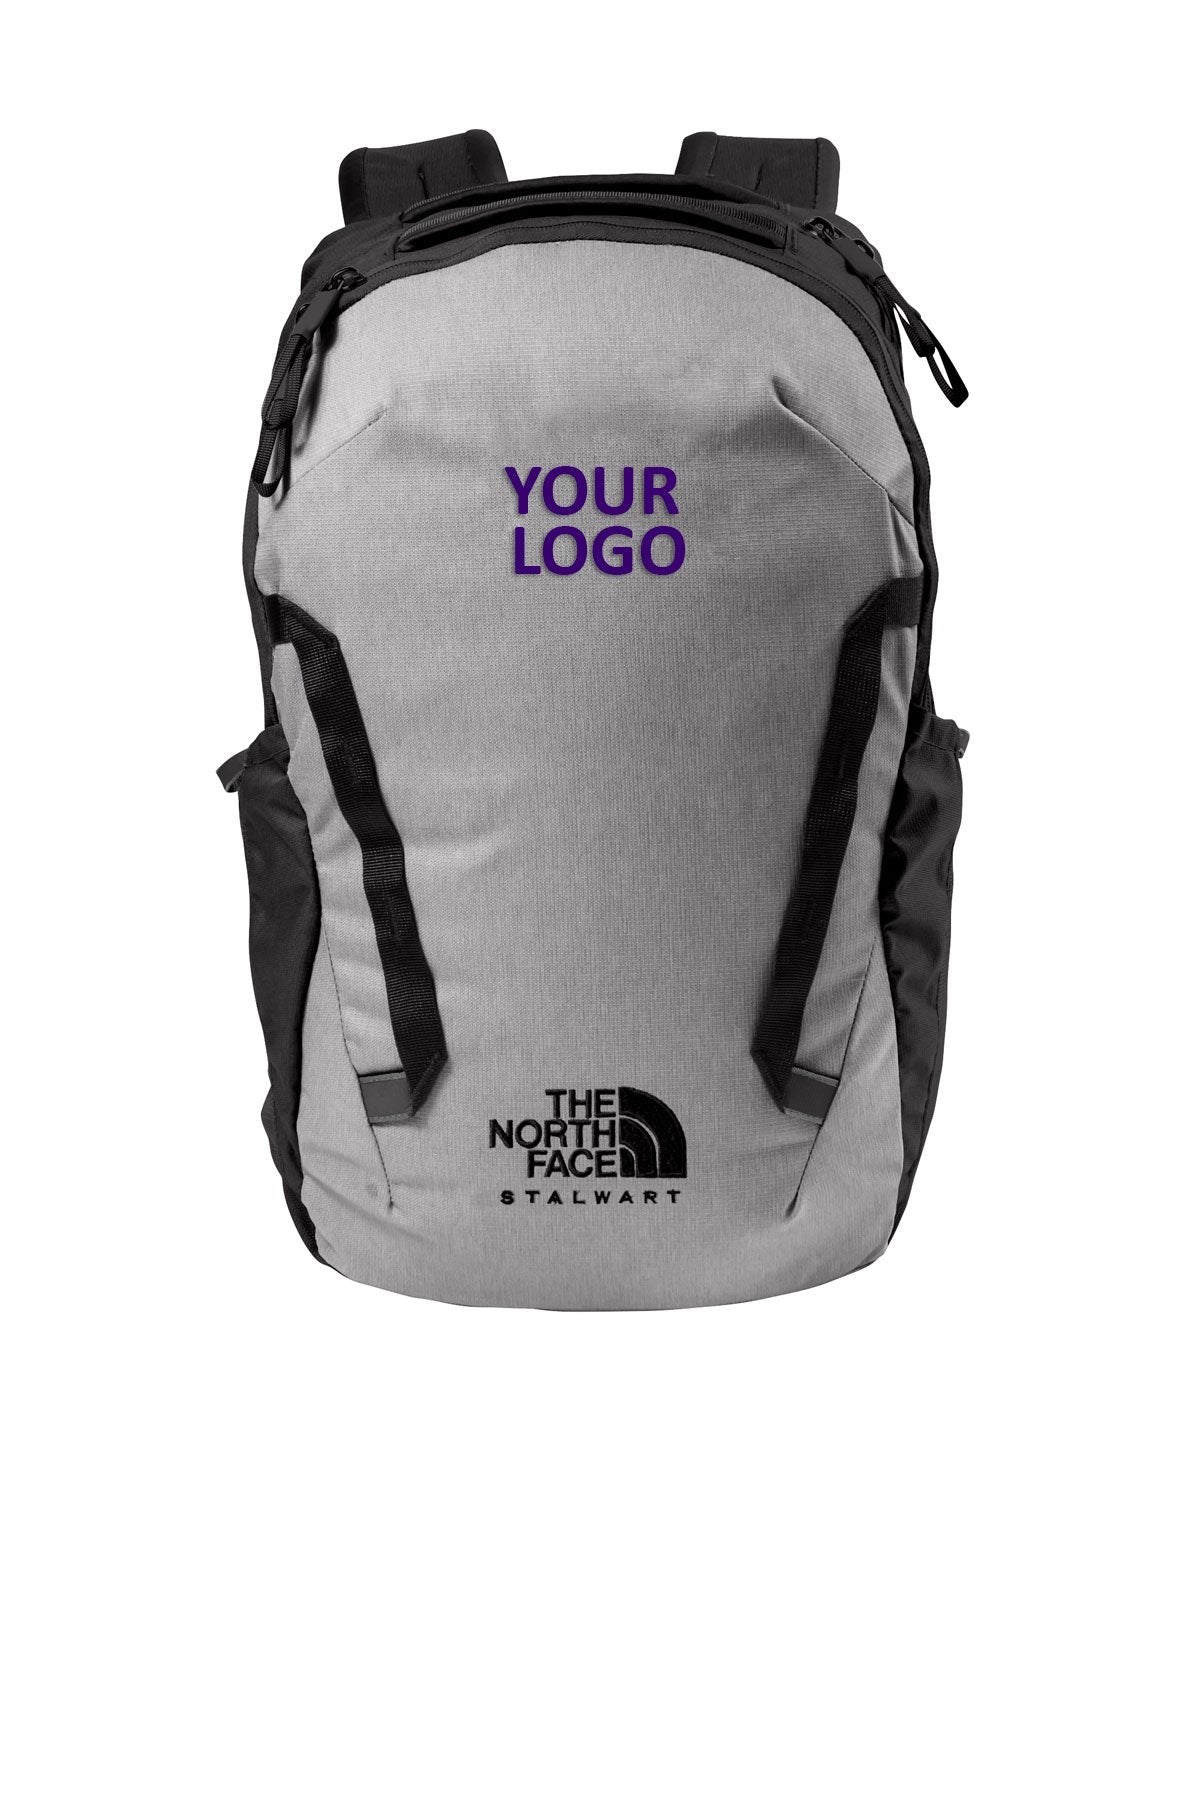 The North Face Stalwart Backpack Mid Grey Dark Heather TNF Black